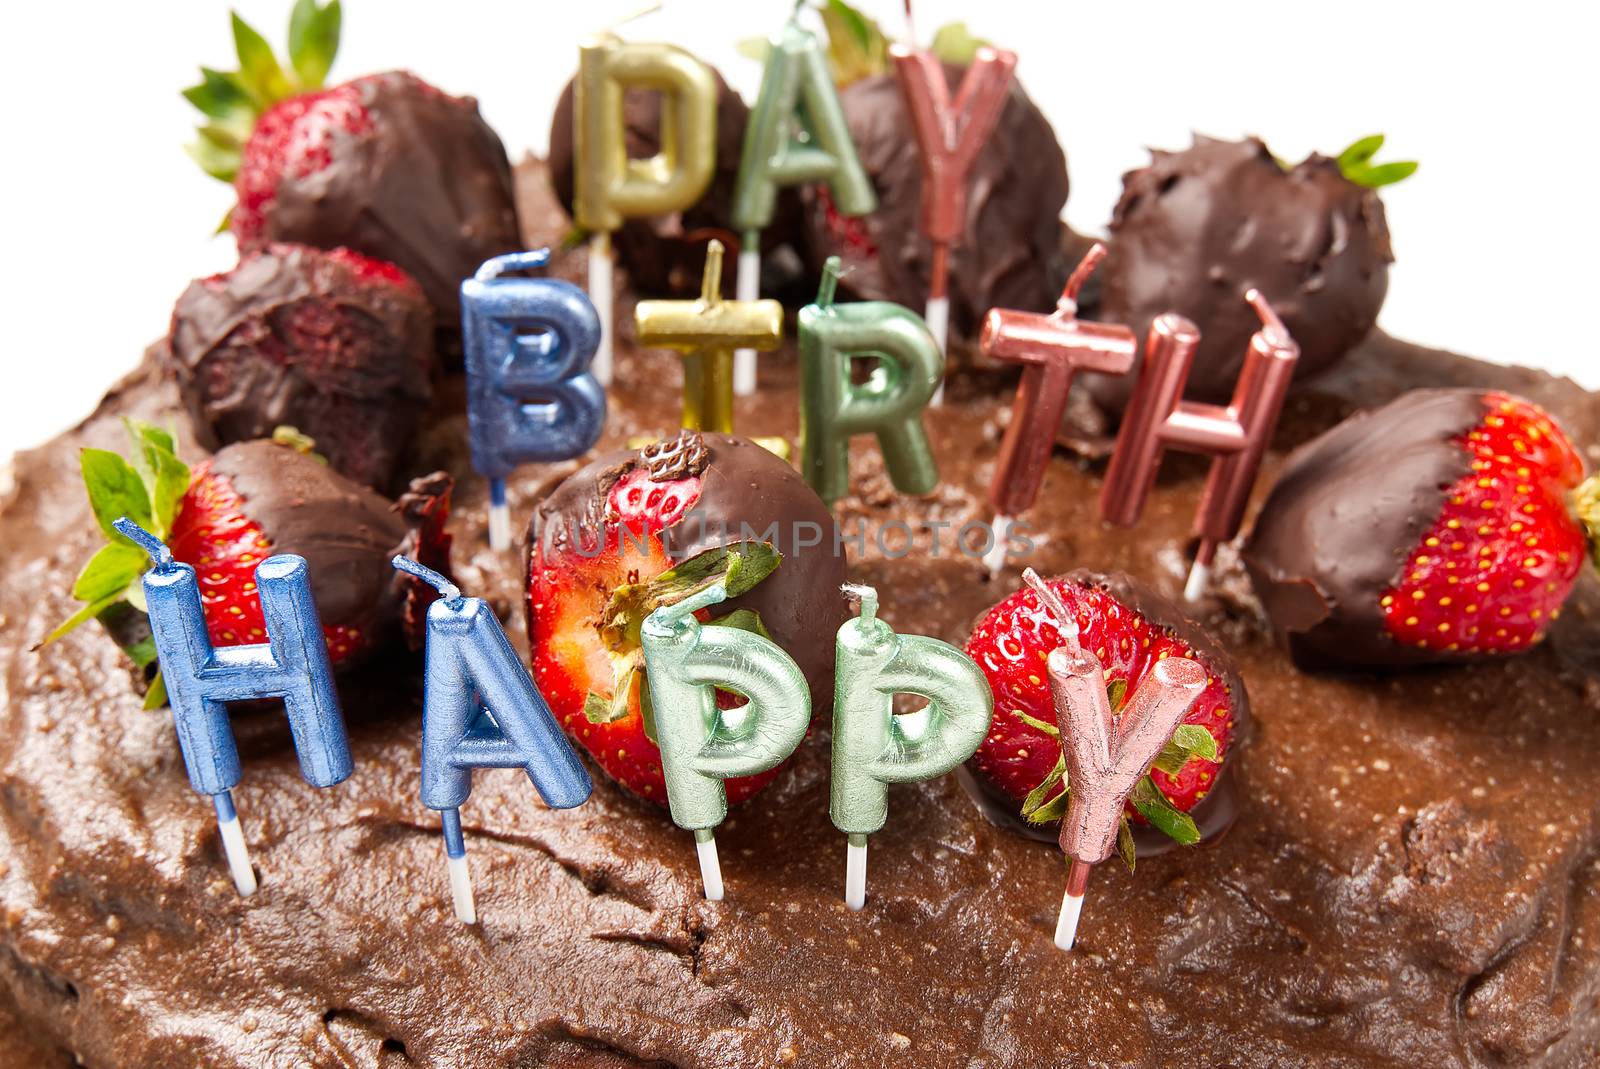 homemade chocolate cake with strawberries and happy birthday candles, close-up. by PhotoTime